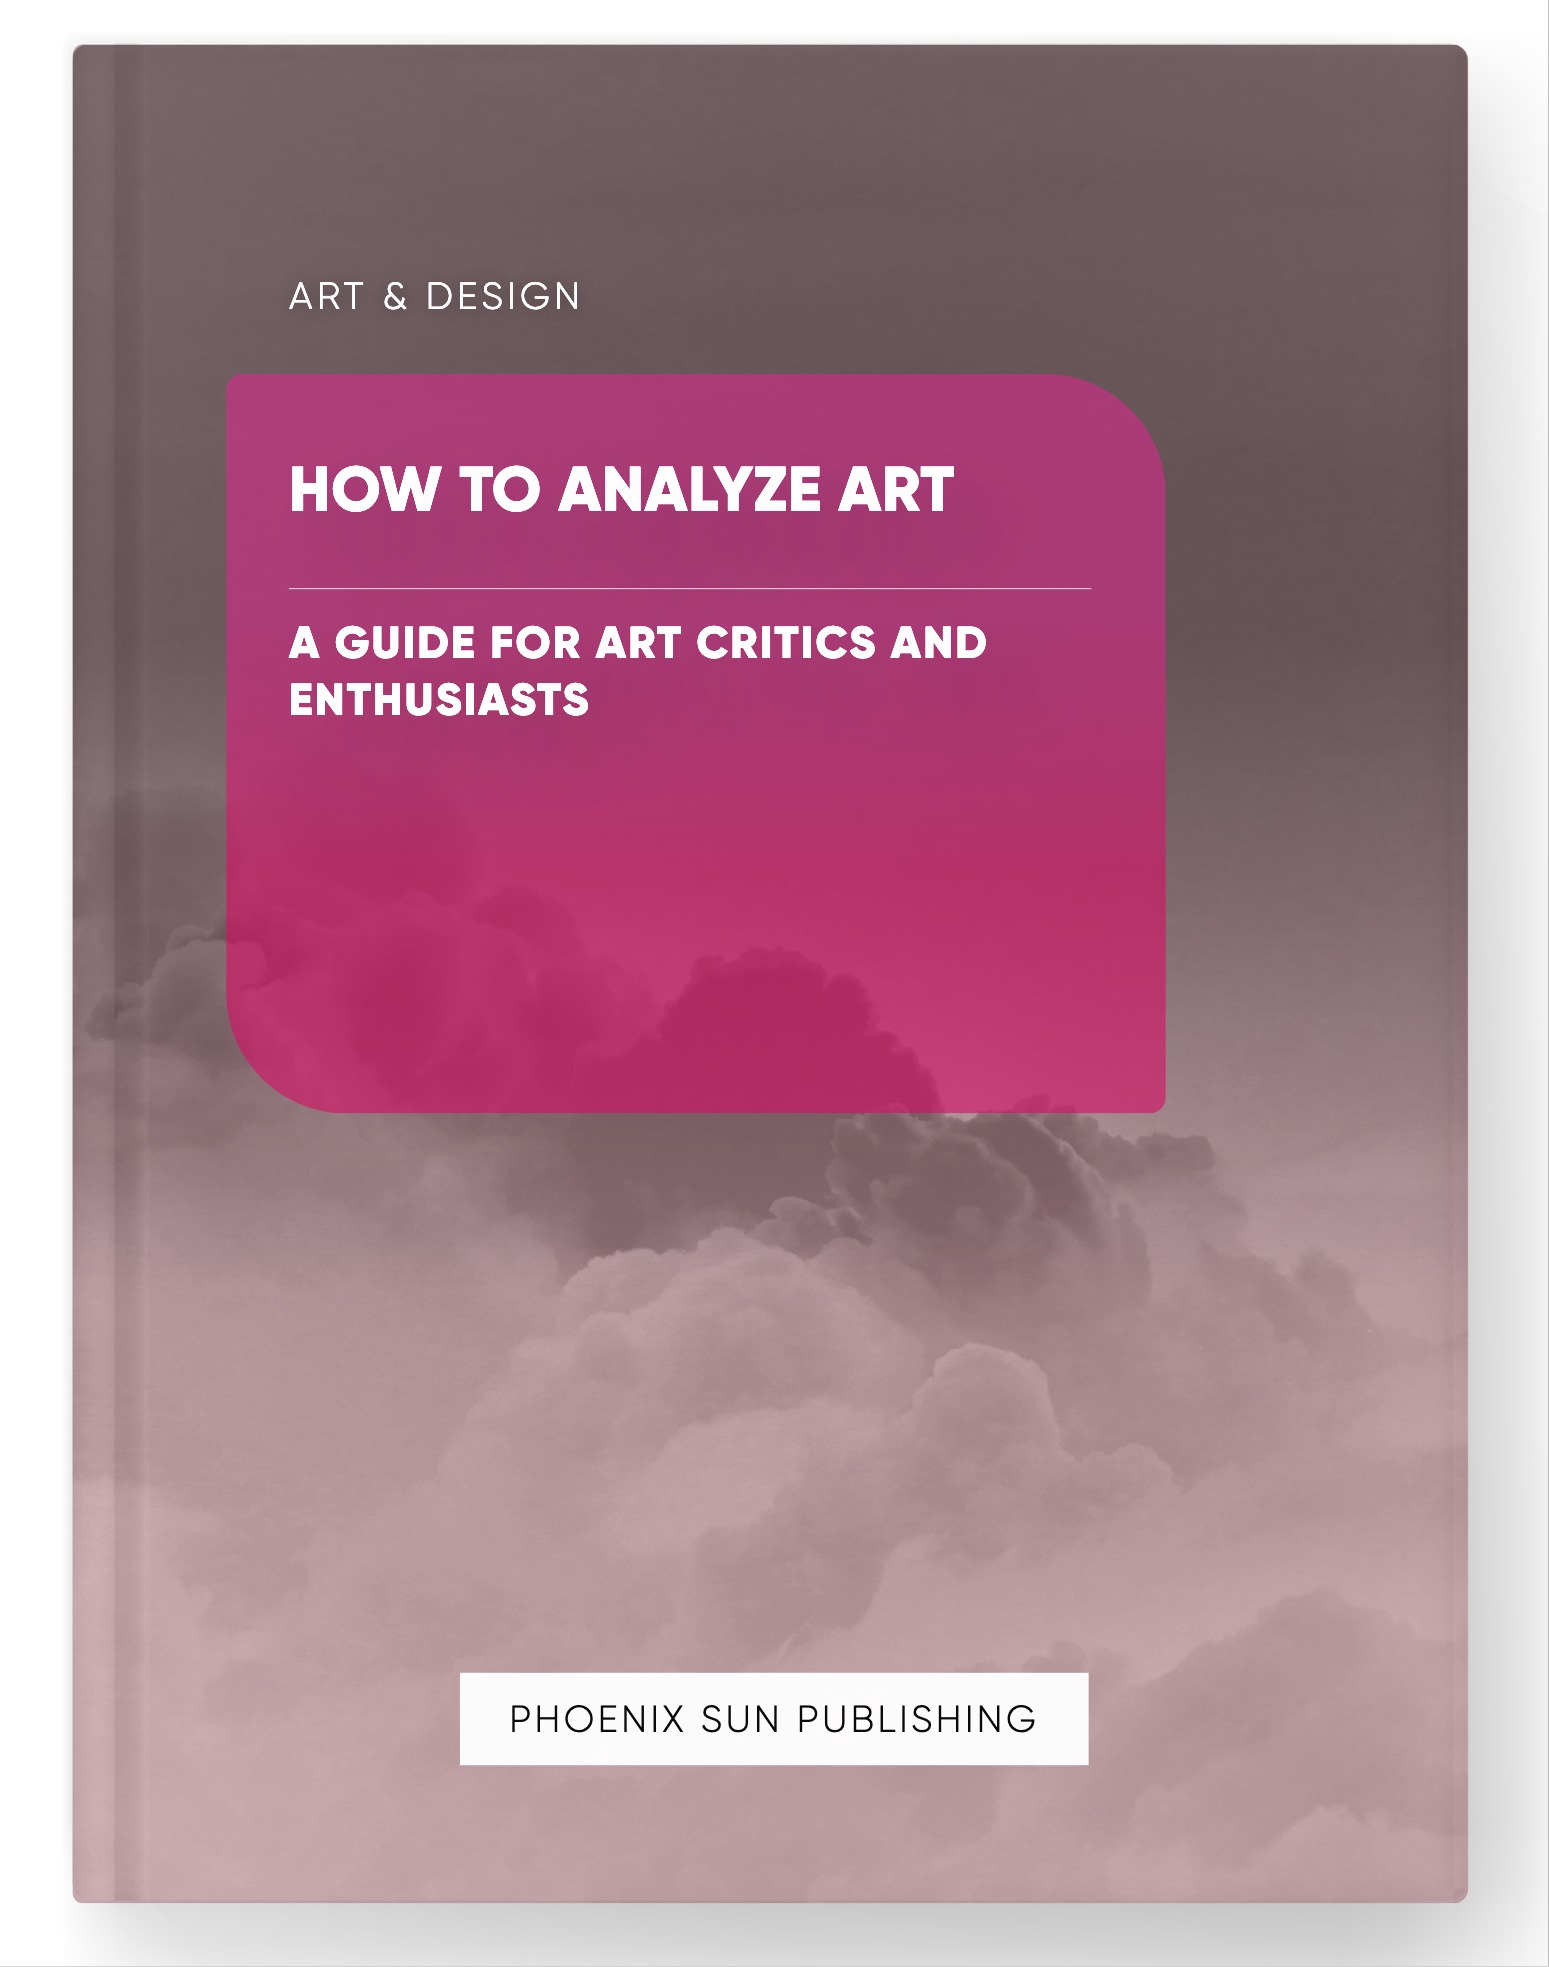 How To Analyze Art – A Guide for Art Critics and Enthusiasts